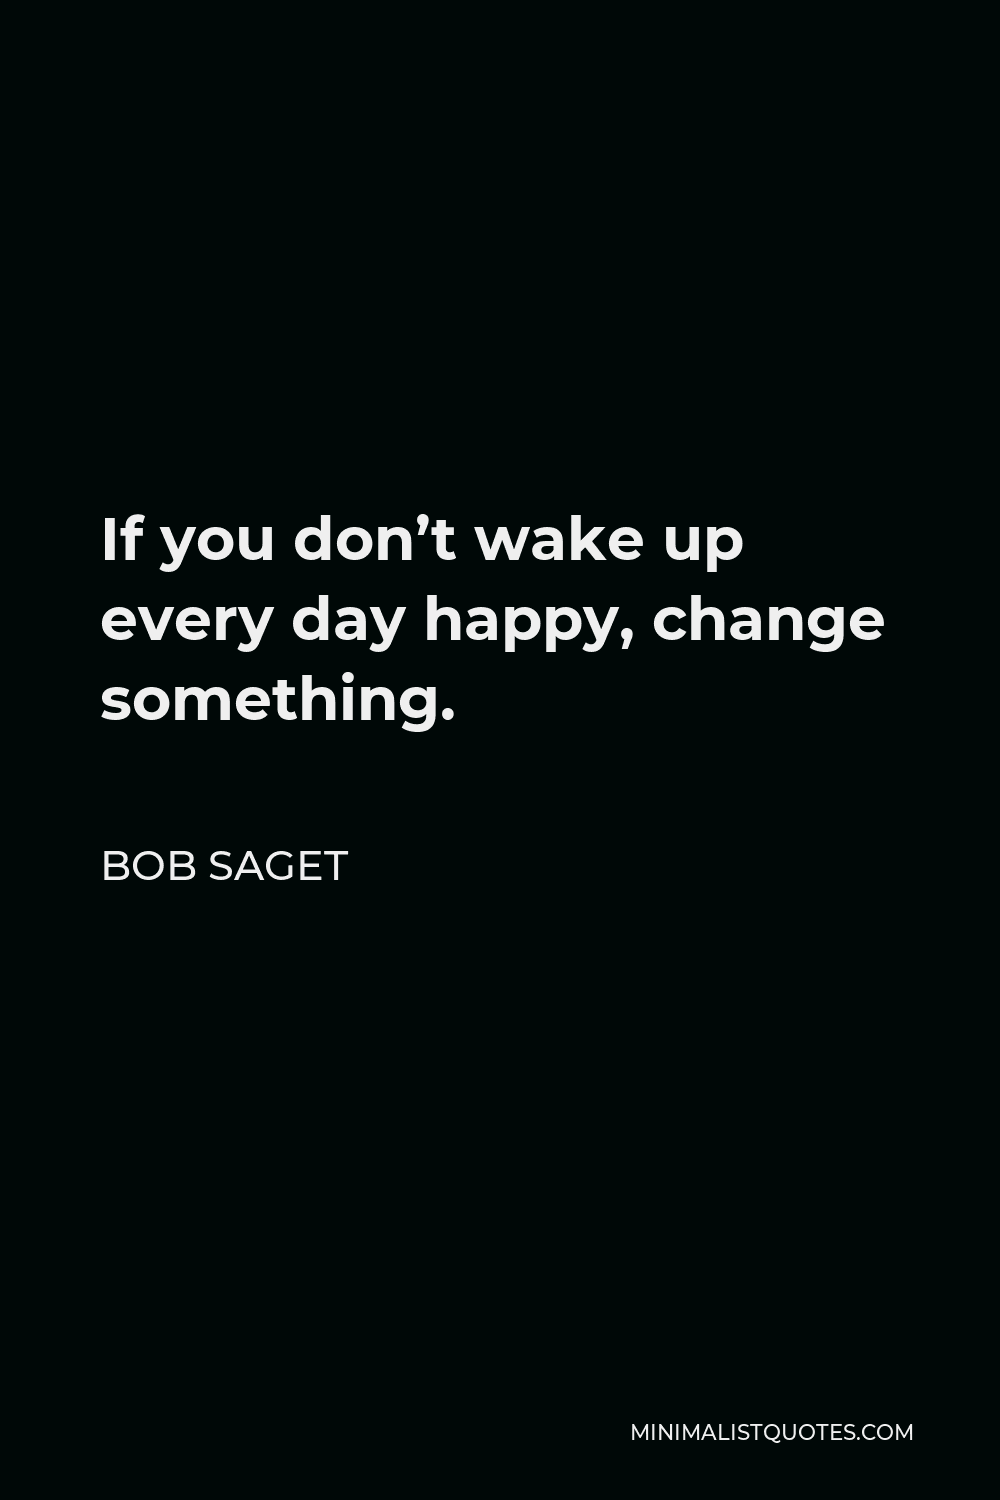 Bob Saget Quote - If you don’t wake up every day happy, change something.